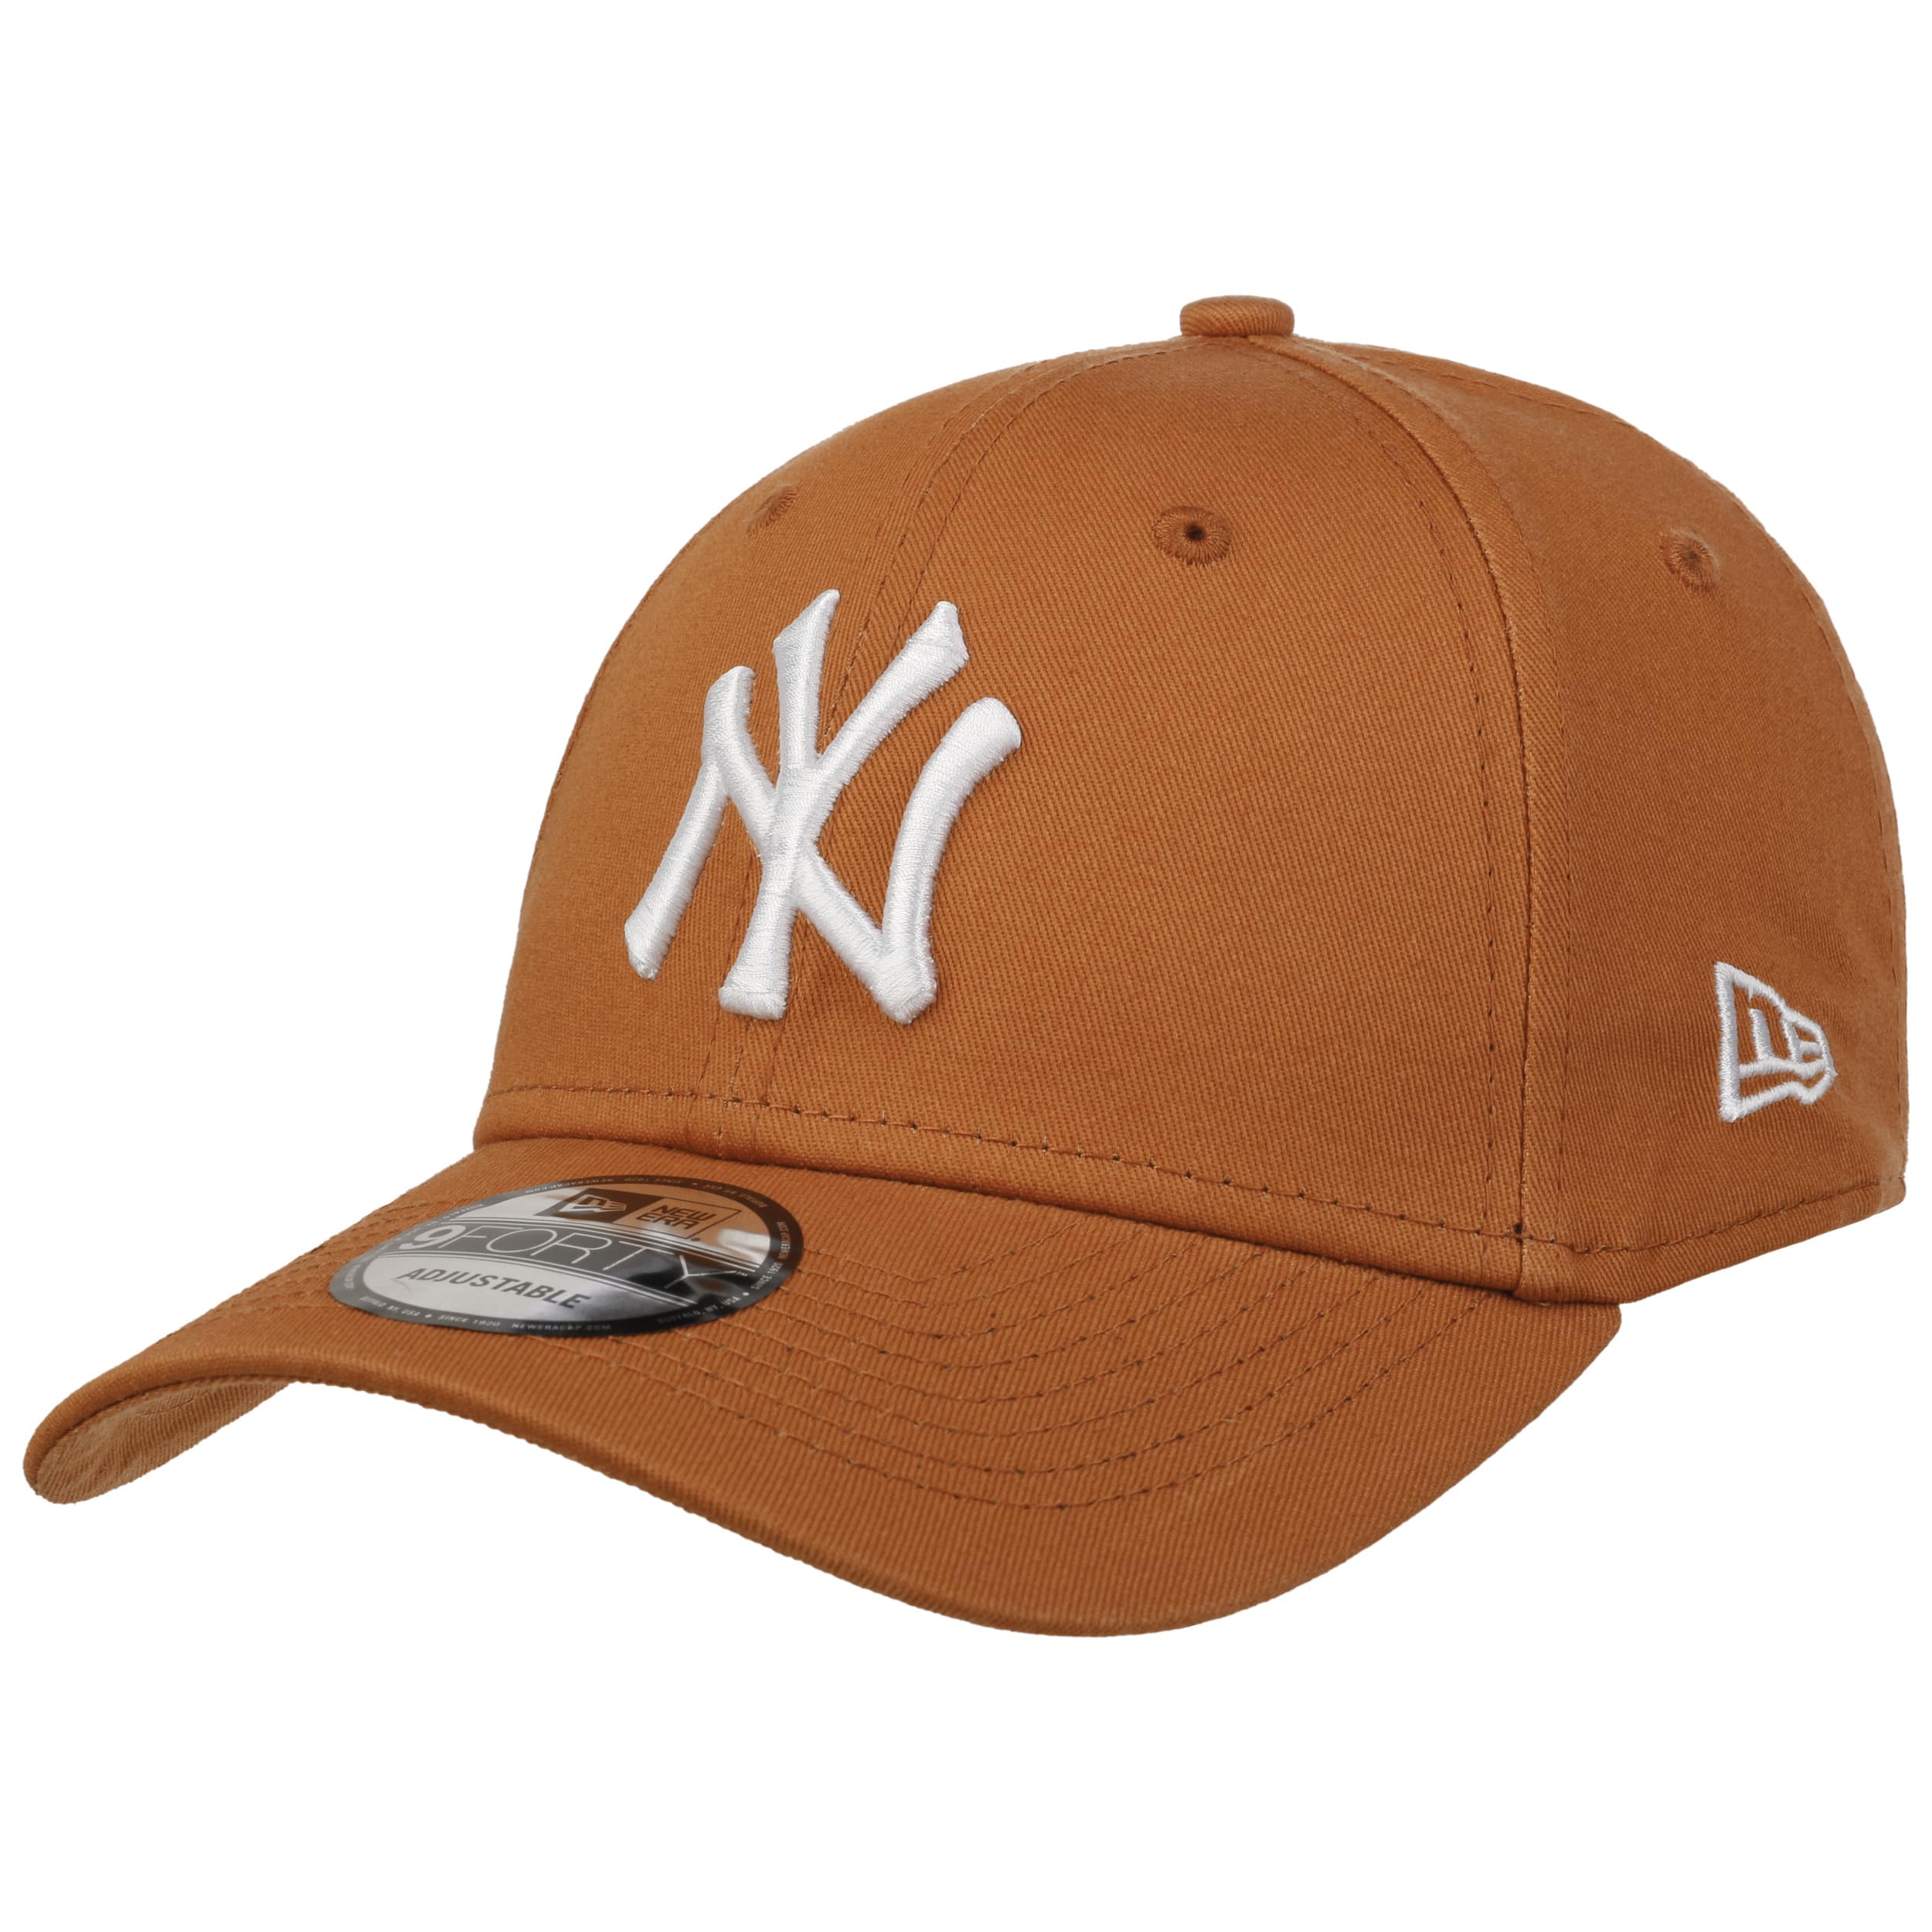 New York Yankees Womens Green 9FORTY Adjustable Cap